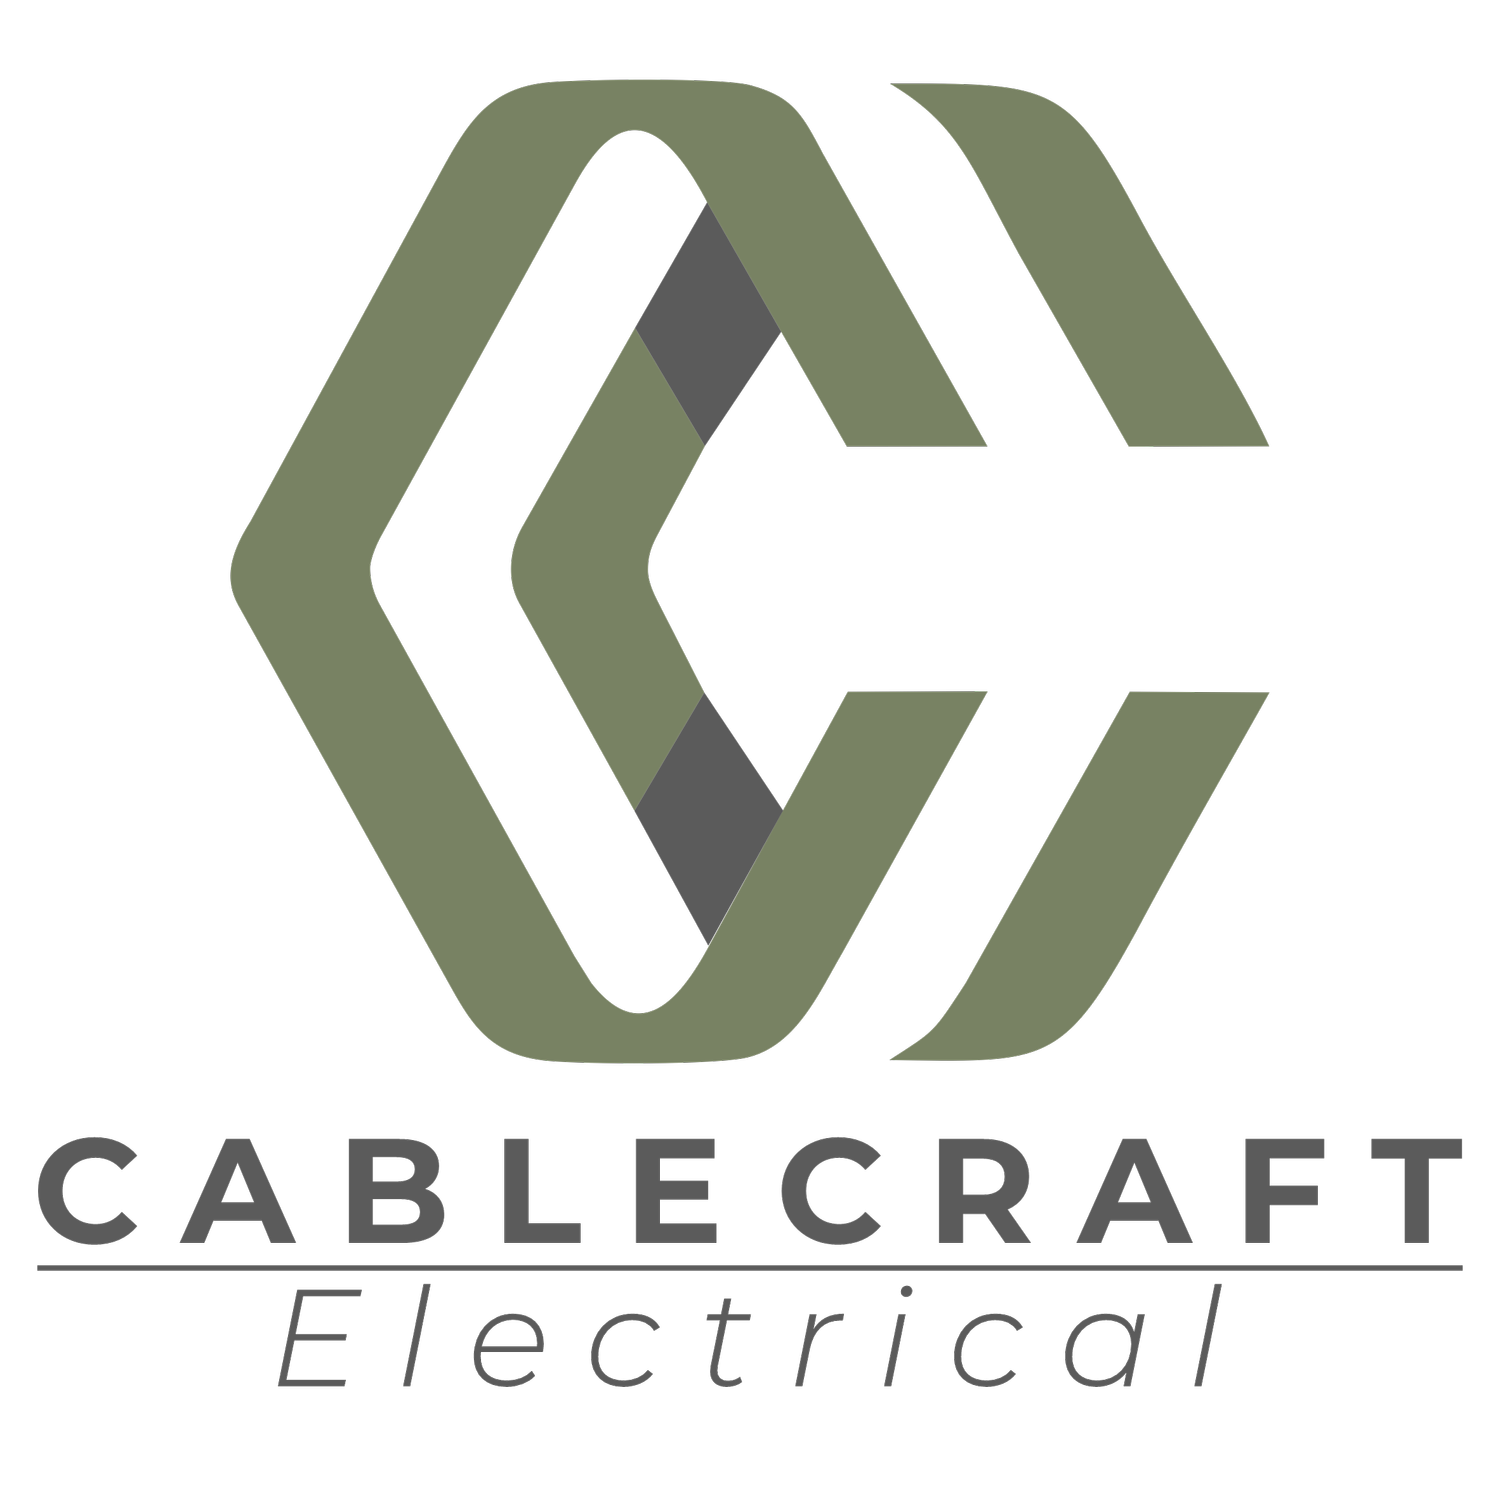 CABLE CRAFT ELECTRICAL